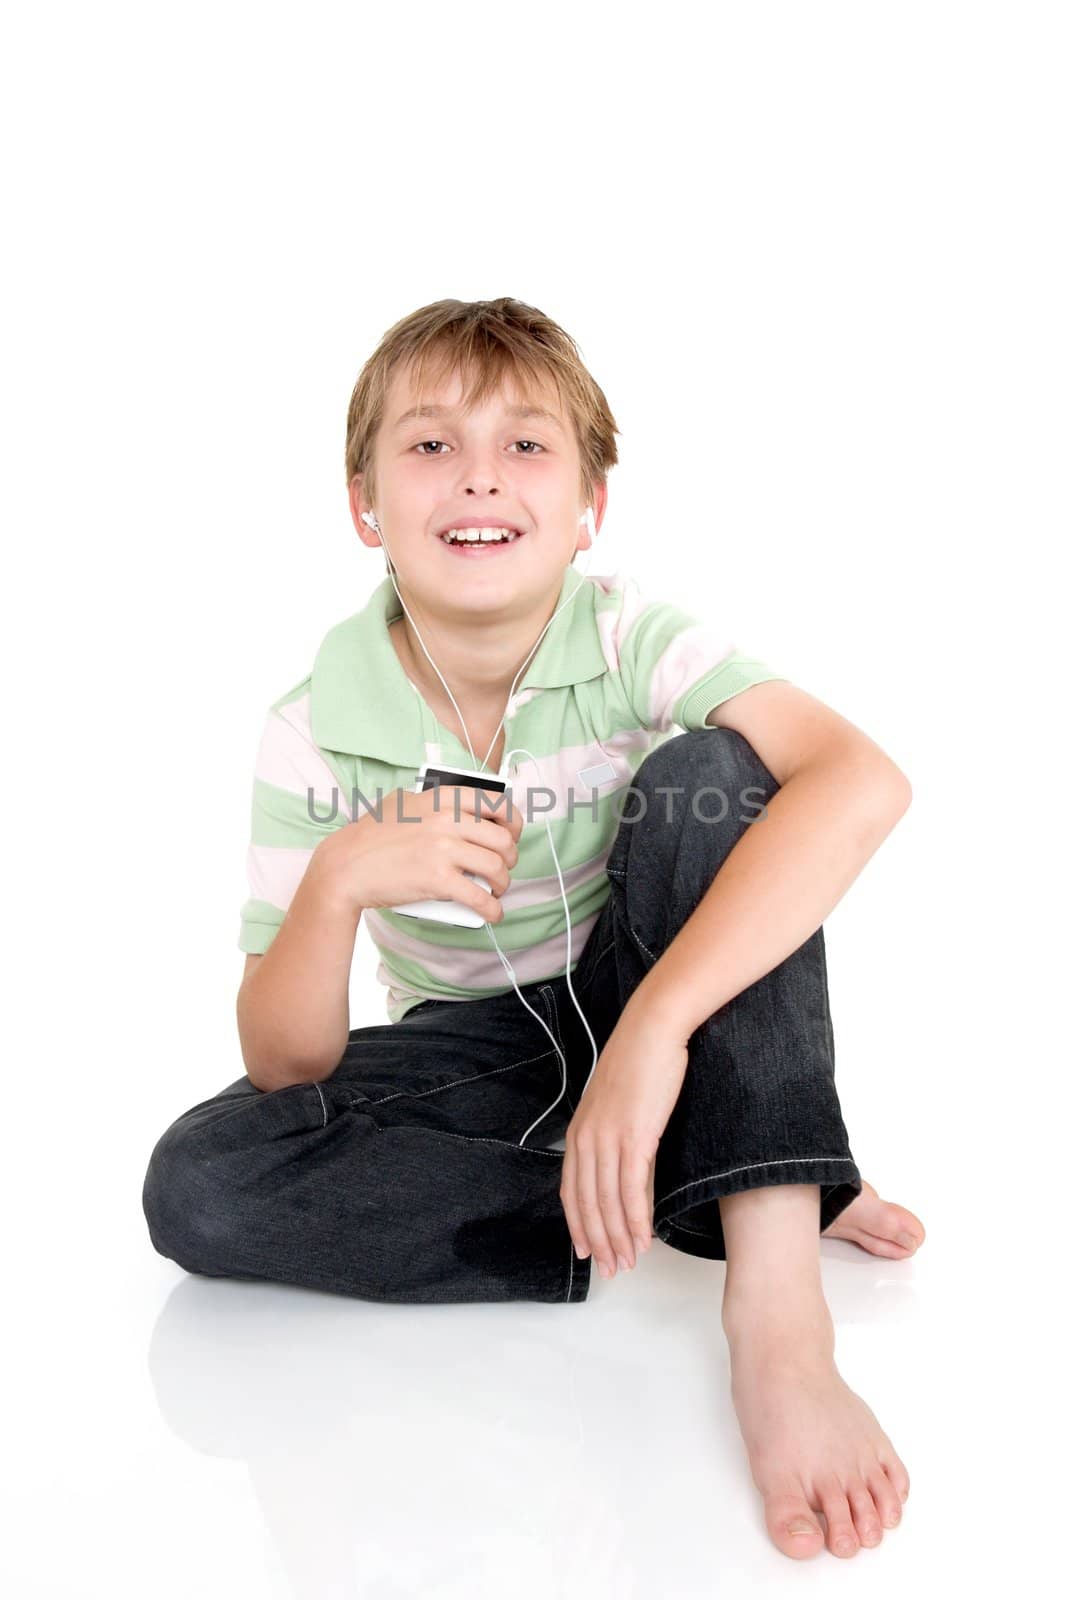 Young happy child sitting casually with an electronic music player.